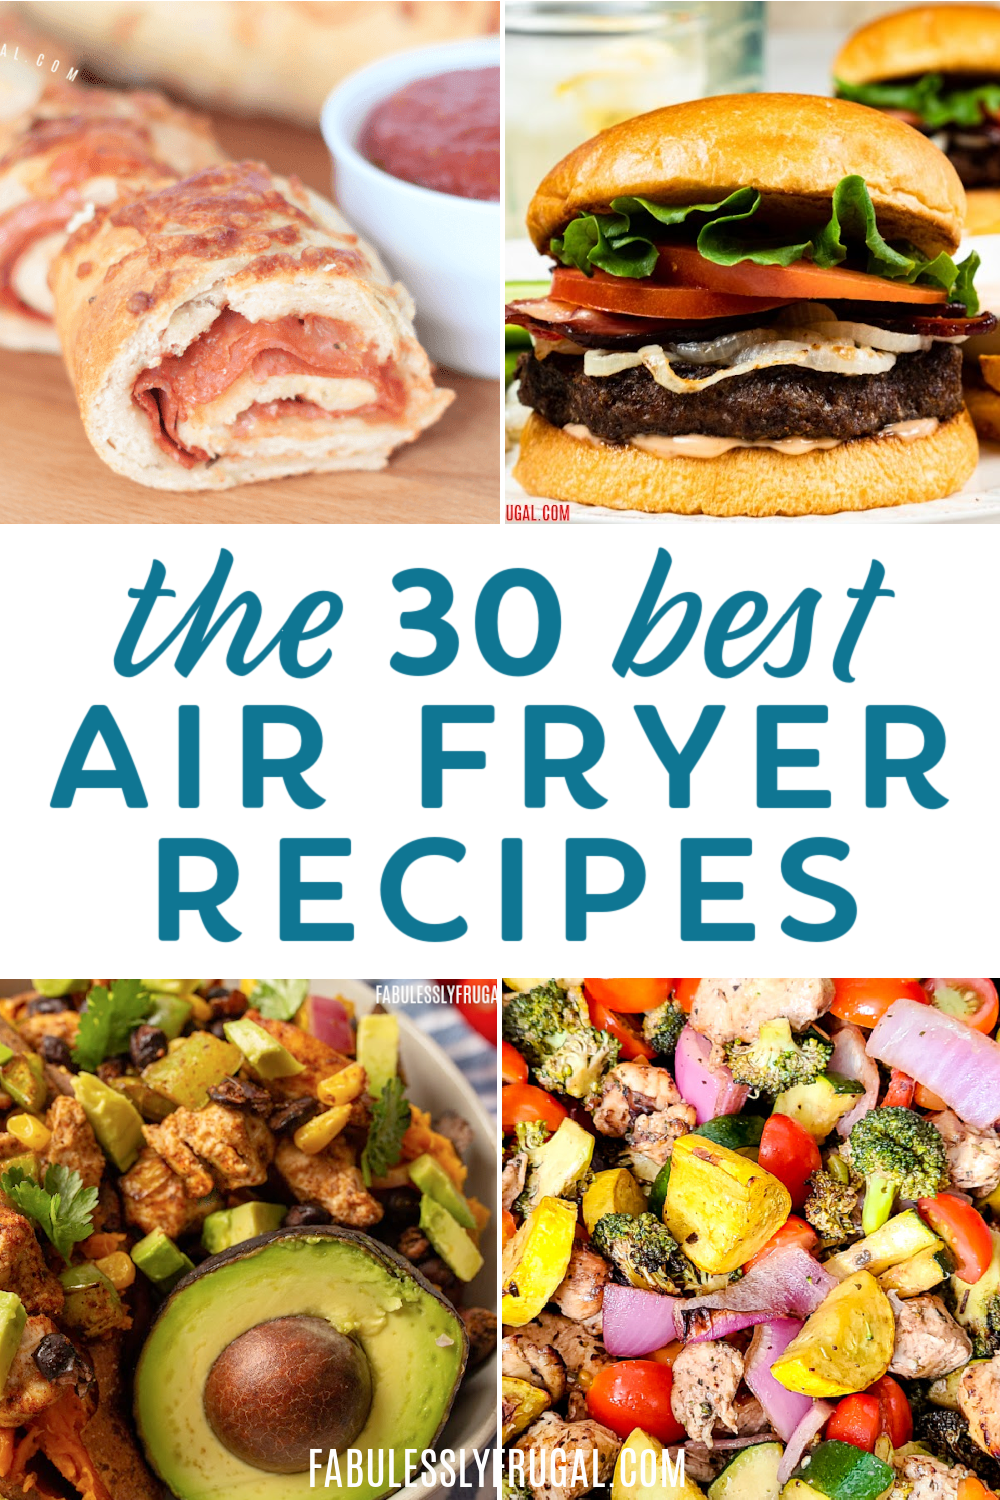 https://fabulesslyfrugal.com/wp-content/uploads/2022/12/6_The-Best-Air-Fryer-Recipes-Ever-1.png